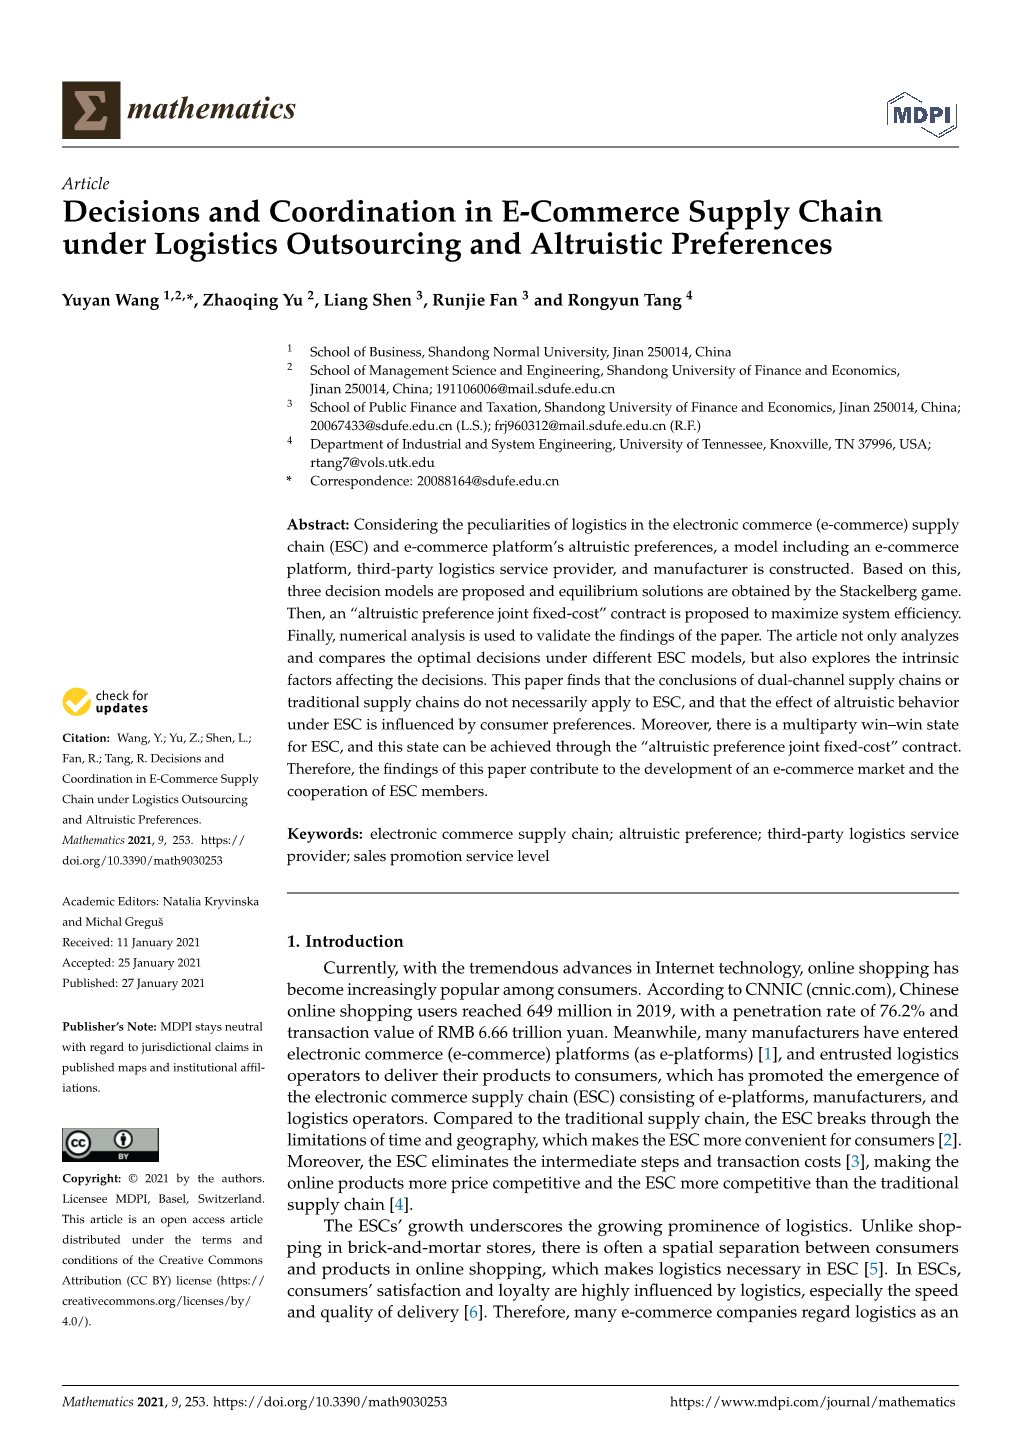 Decisions and Coordination in E-Commerce Supply Chain Under Logistics Outsourcing and Altruistic Preferences